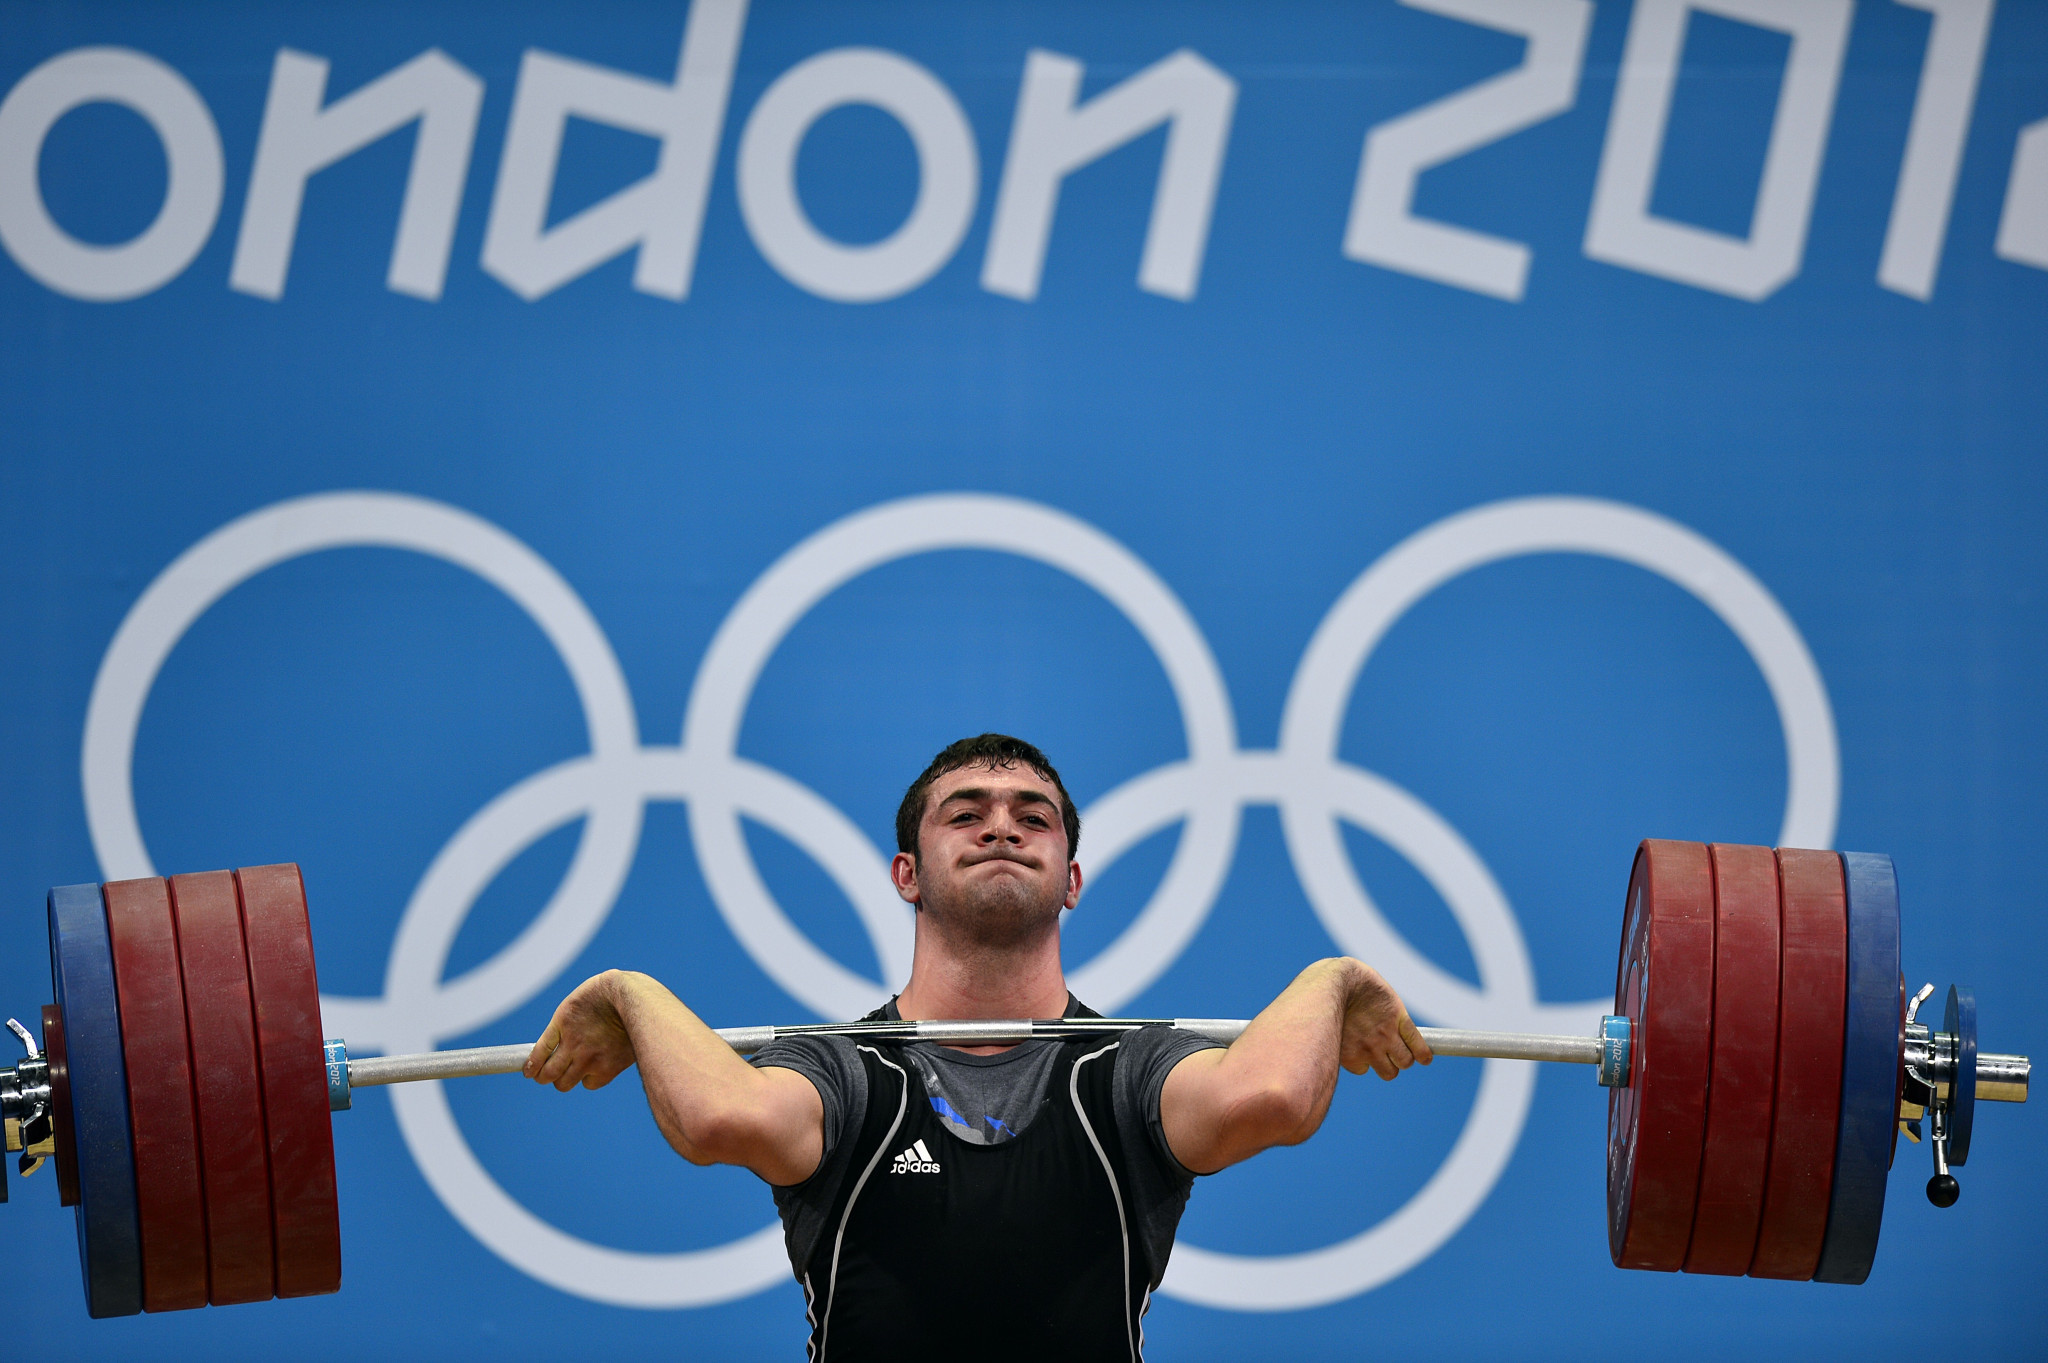 Saeid Mohammadpourkarkaragh is the sole men's gold medal upgrade from London 2012 ©Getty Images